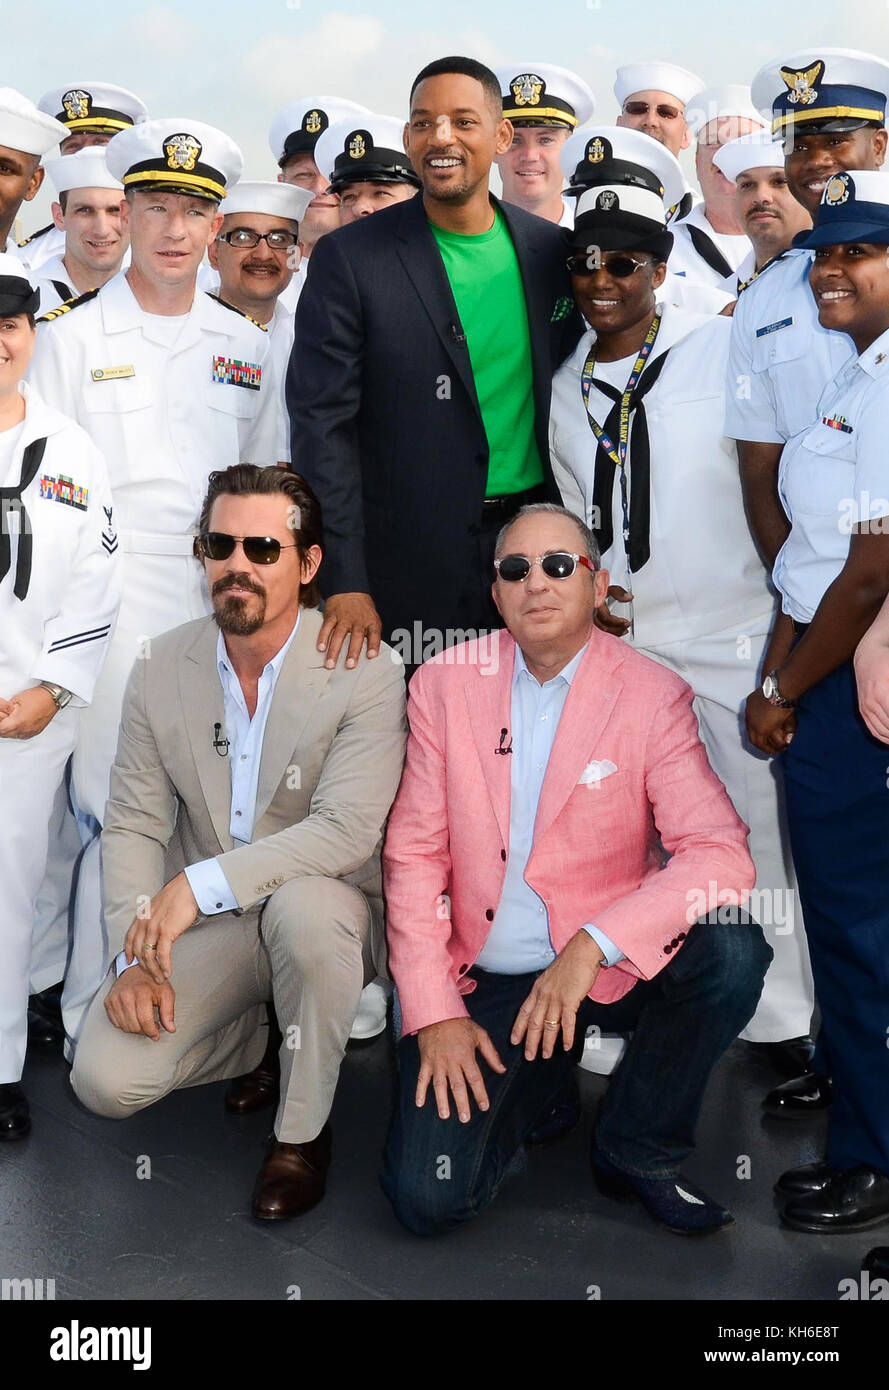 Josh Brolin, Will Smith, and director Barry Sonnenfeld at The Intrepid promoting the film Men In Black III, May 23, 2012. Copyright Kristen Driscoll / Media Punch Stock Photo